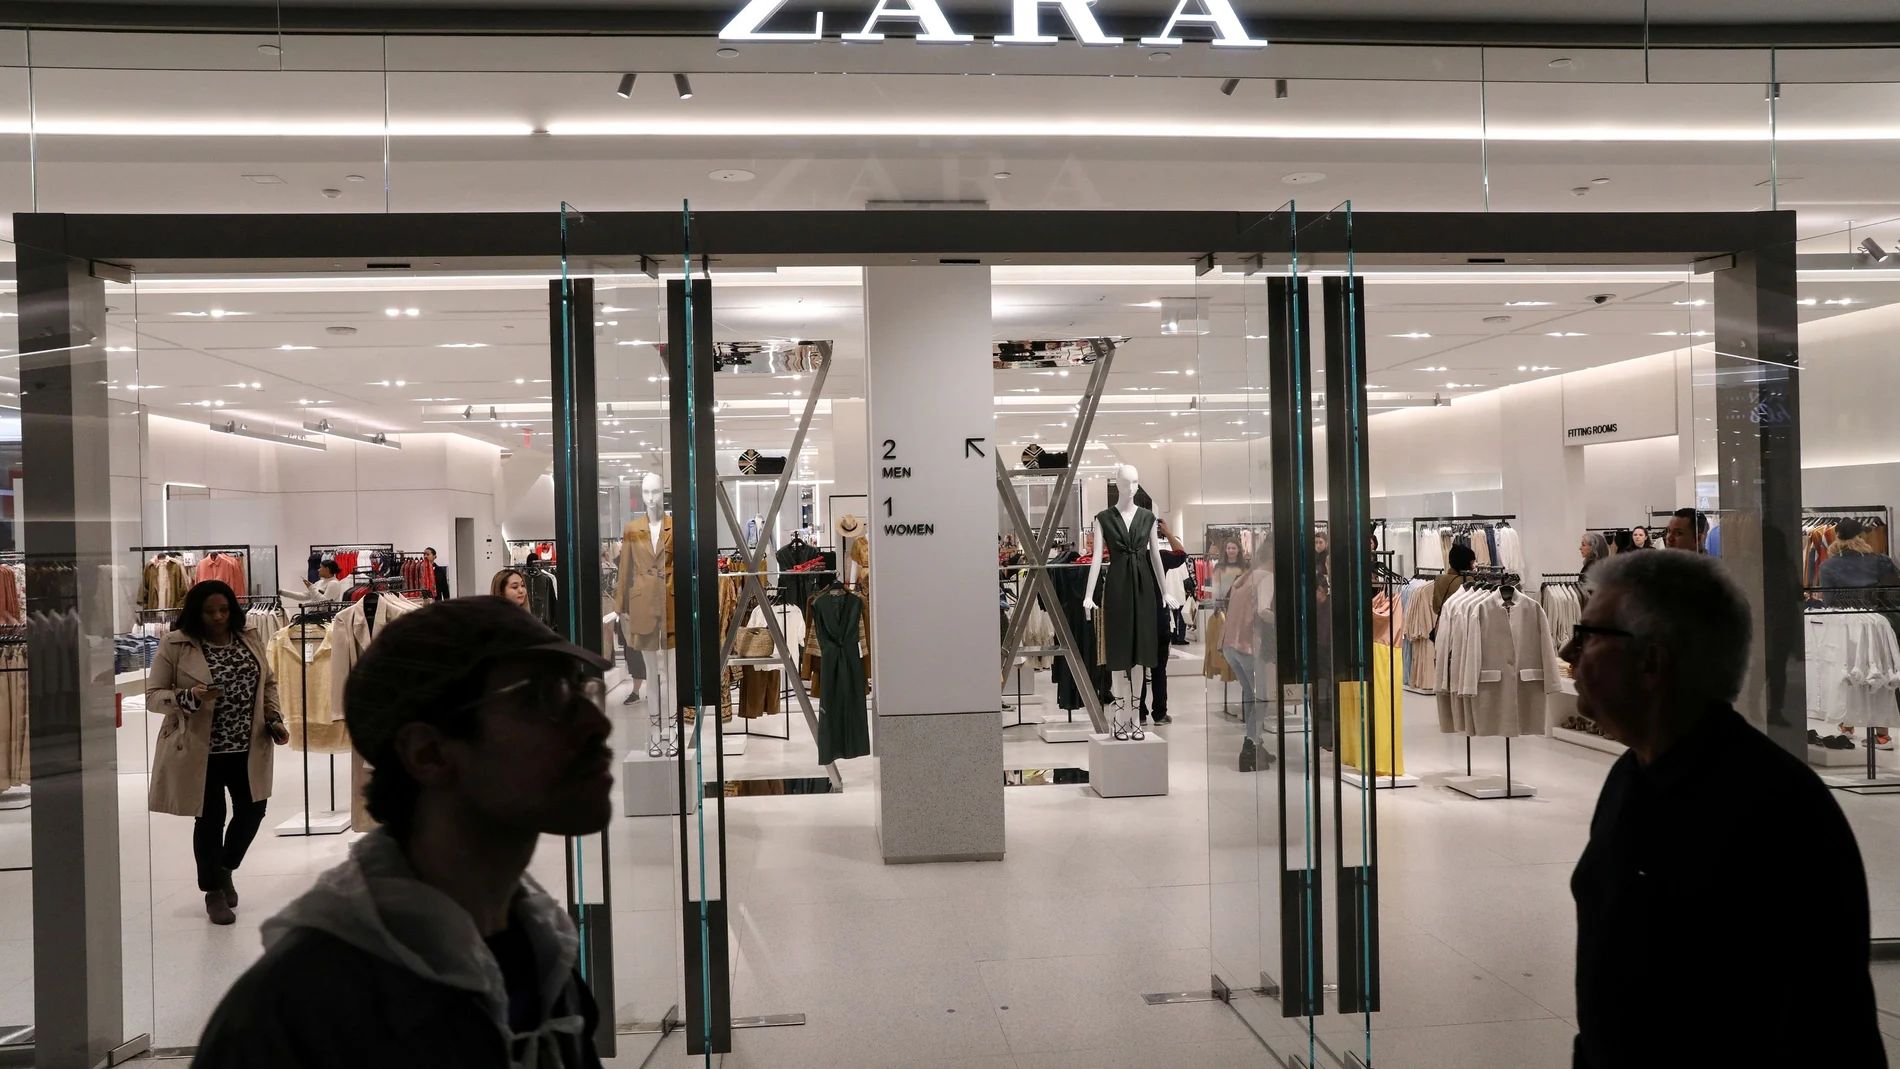 FILE PHOTO: People shop at a Zara store during the grand opening of The Hudson Yards development in New York